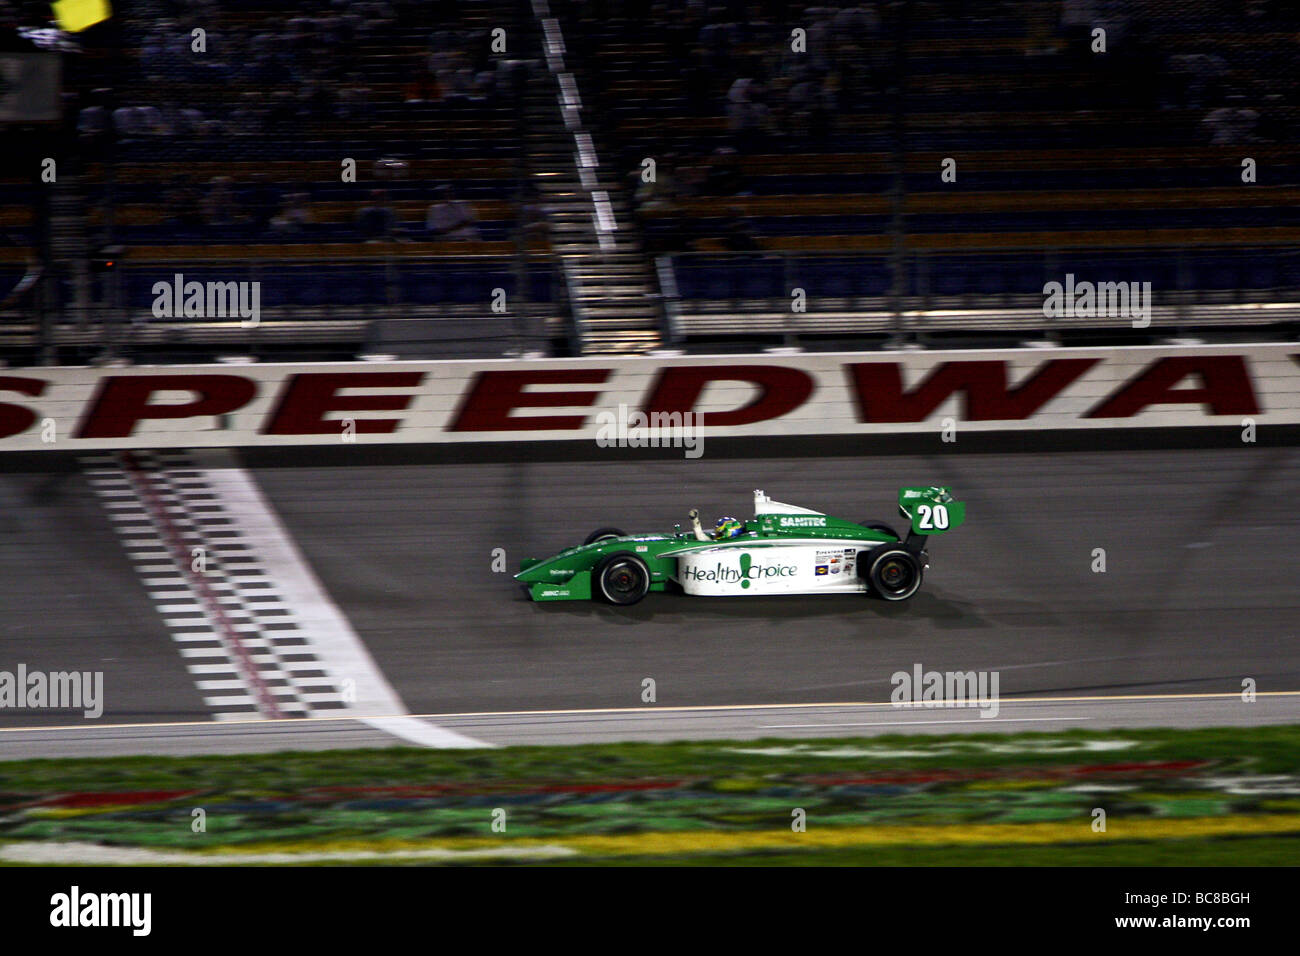 Indy Lights Race Series checkered flag Ana Beatriz Iowa Speedway race finish at night, Indy Lights Stock Photo